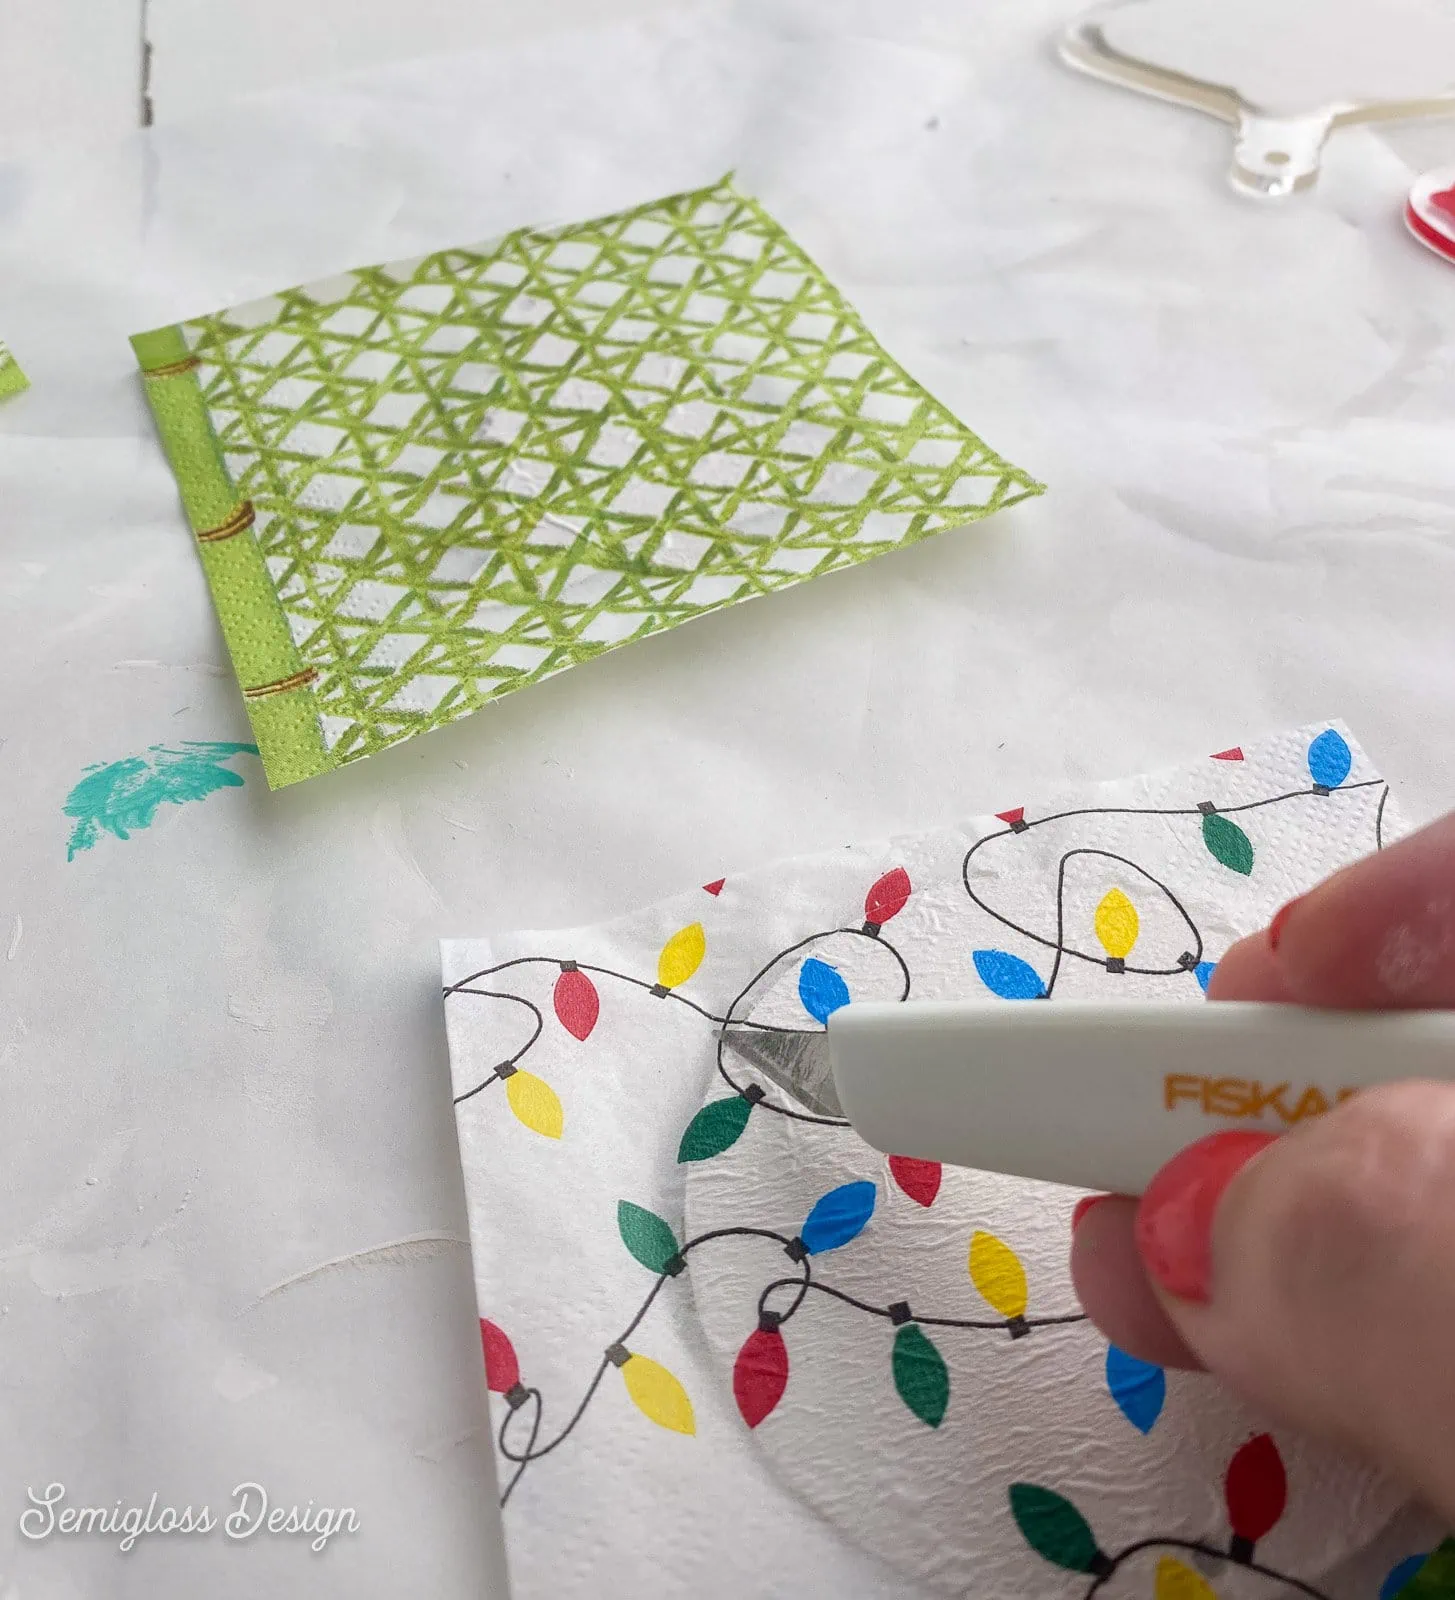 using exacto knife to remove excess paper from ornament